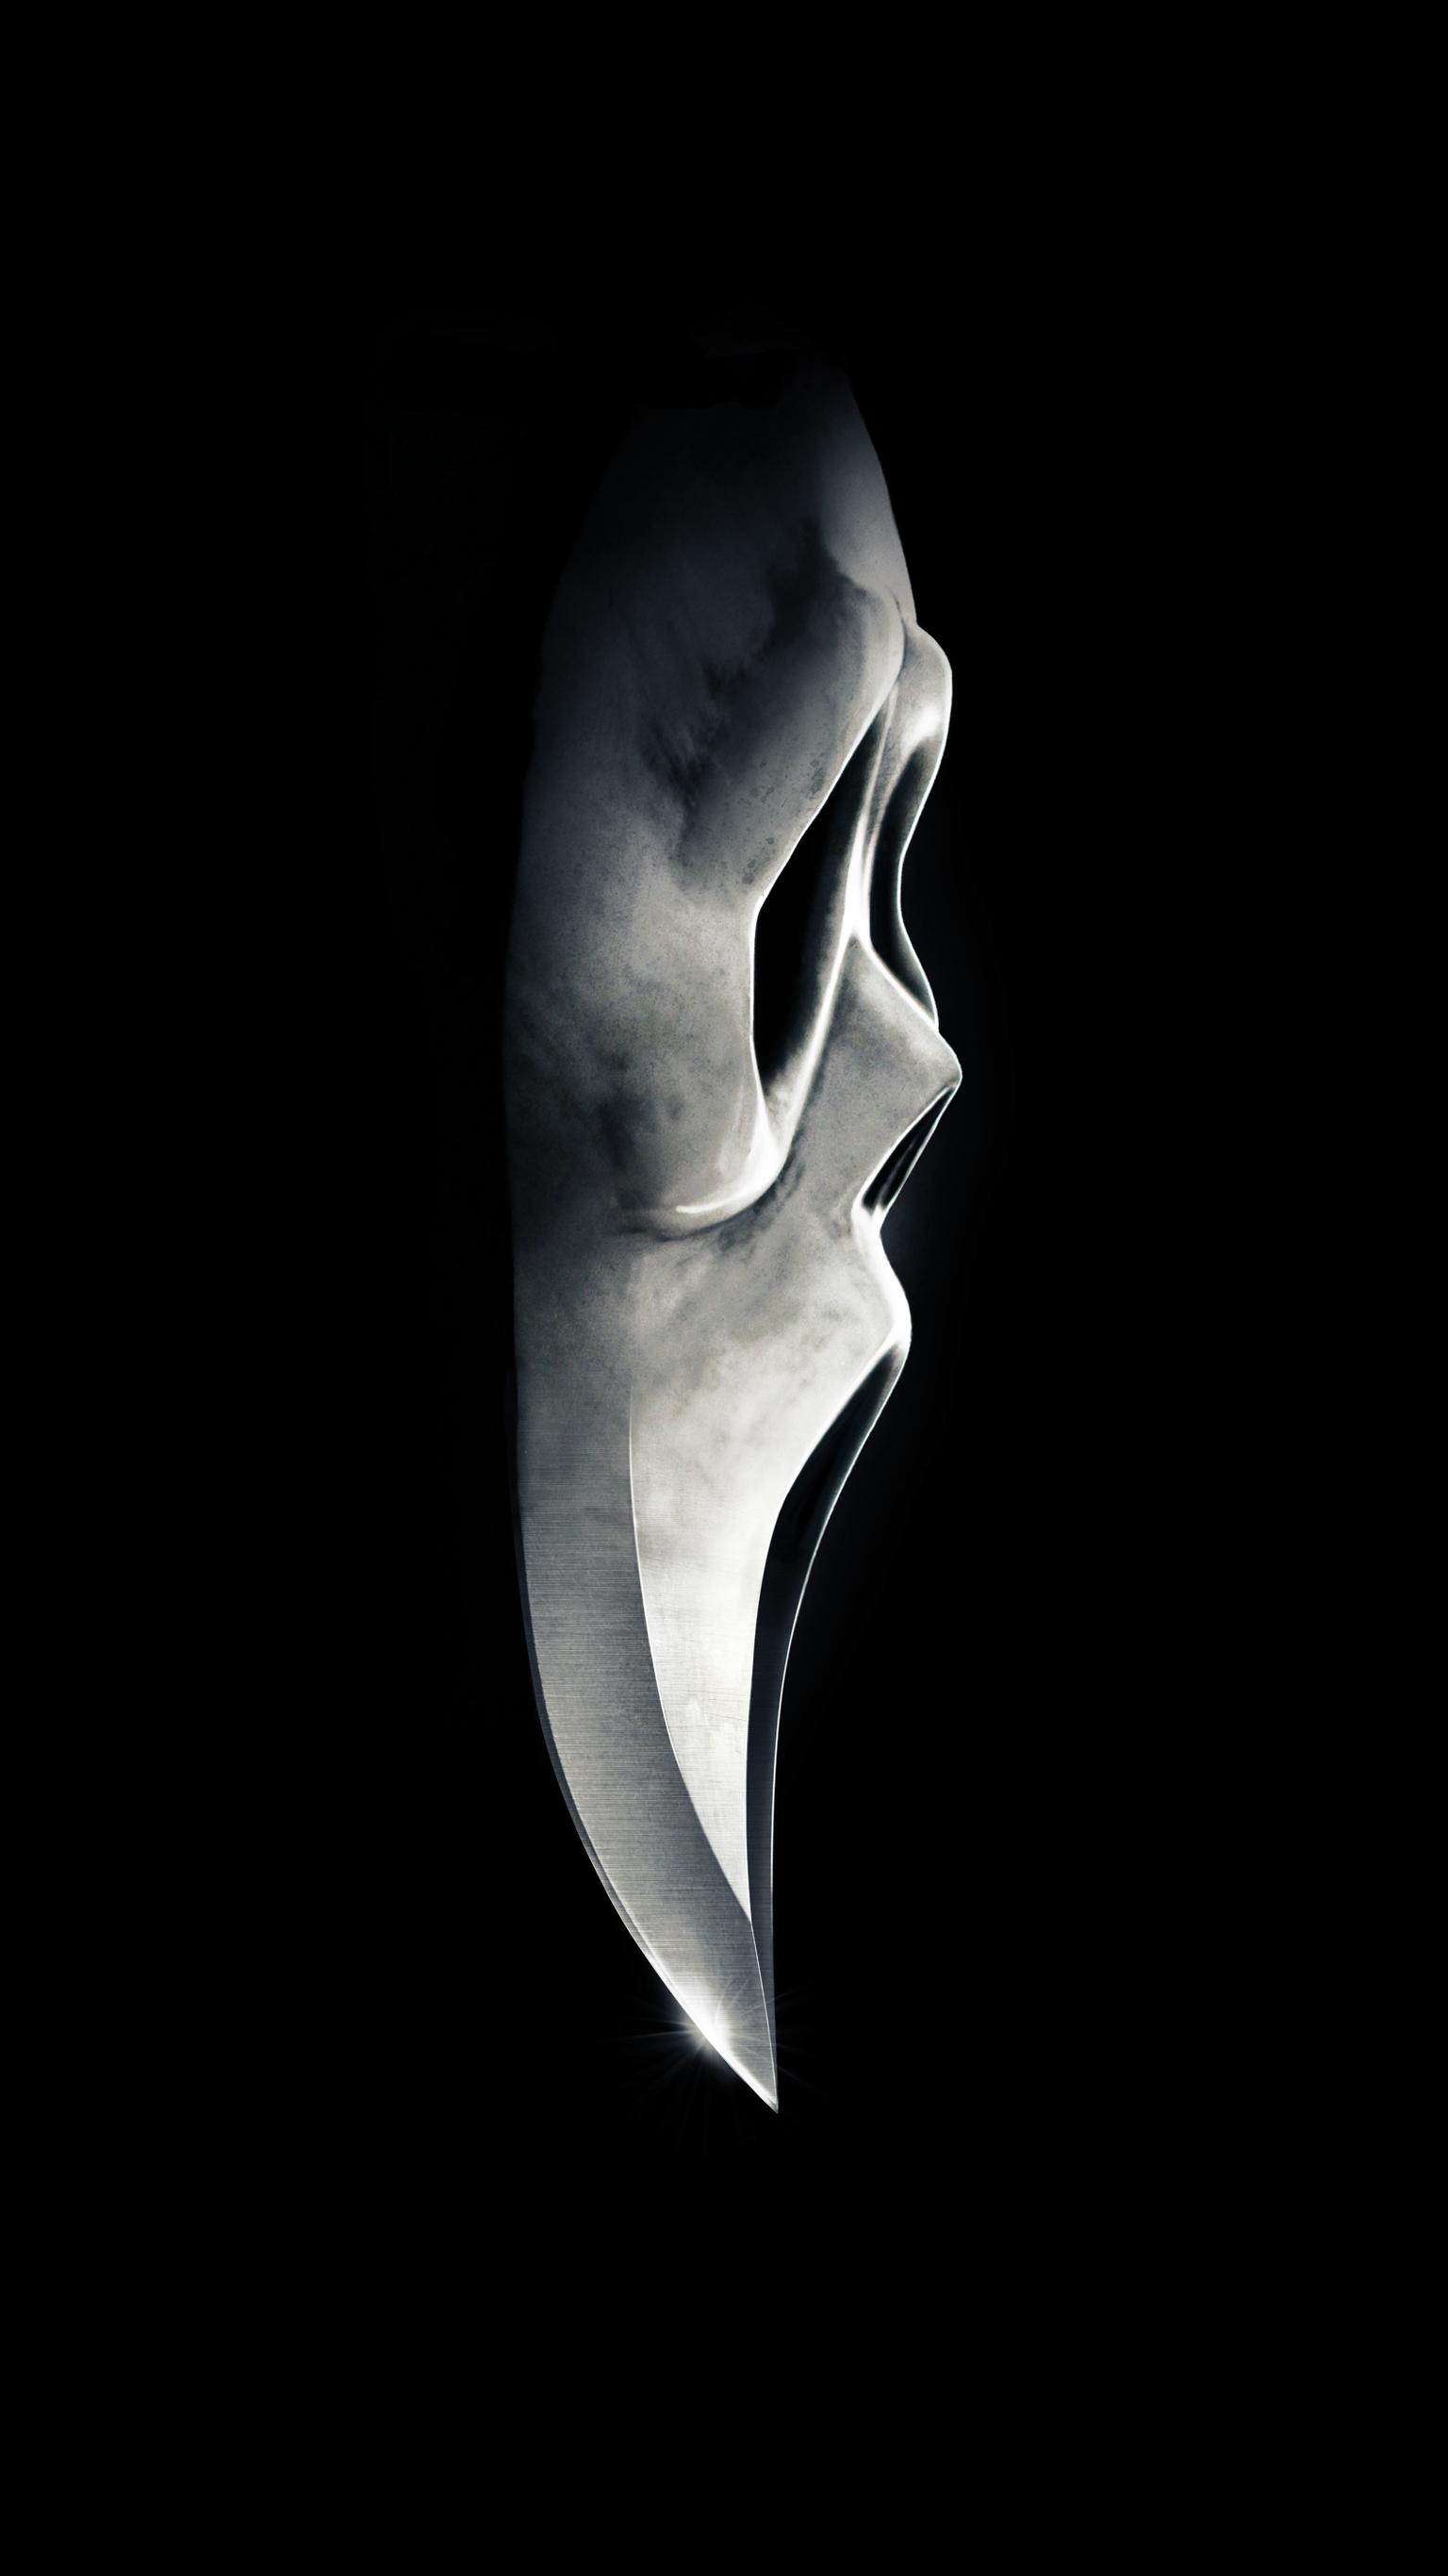 A close up of the face on an image - Ghostface